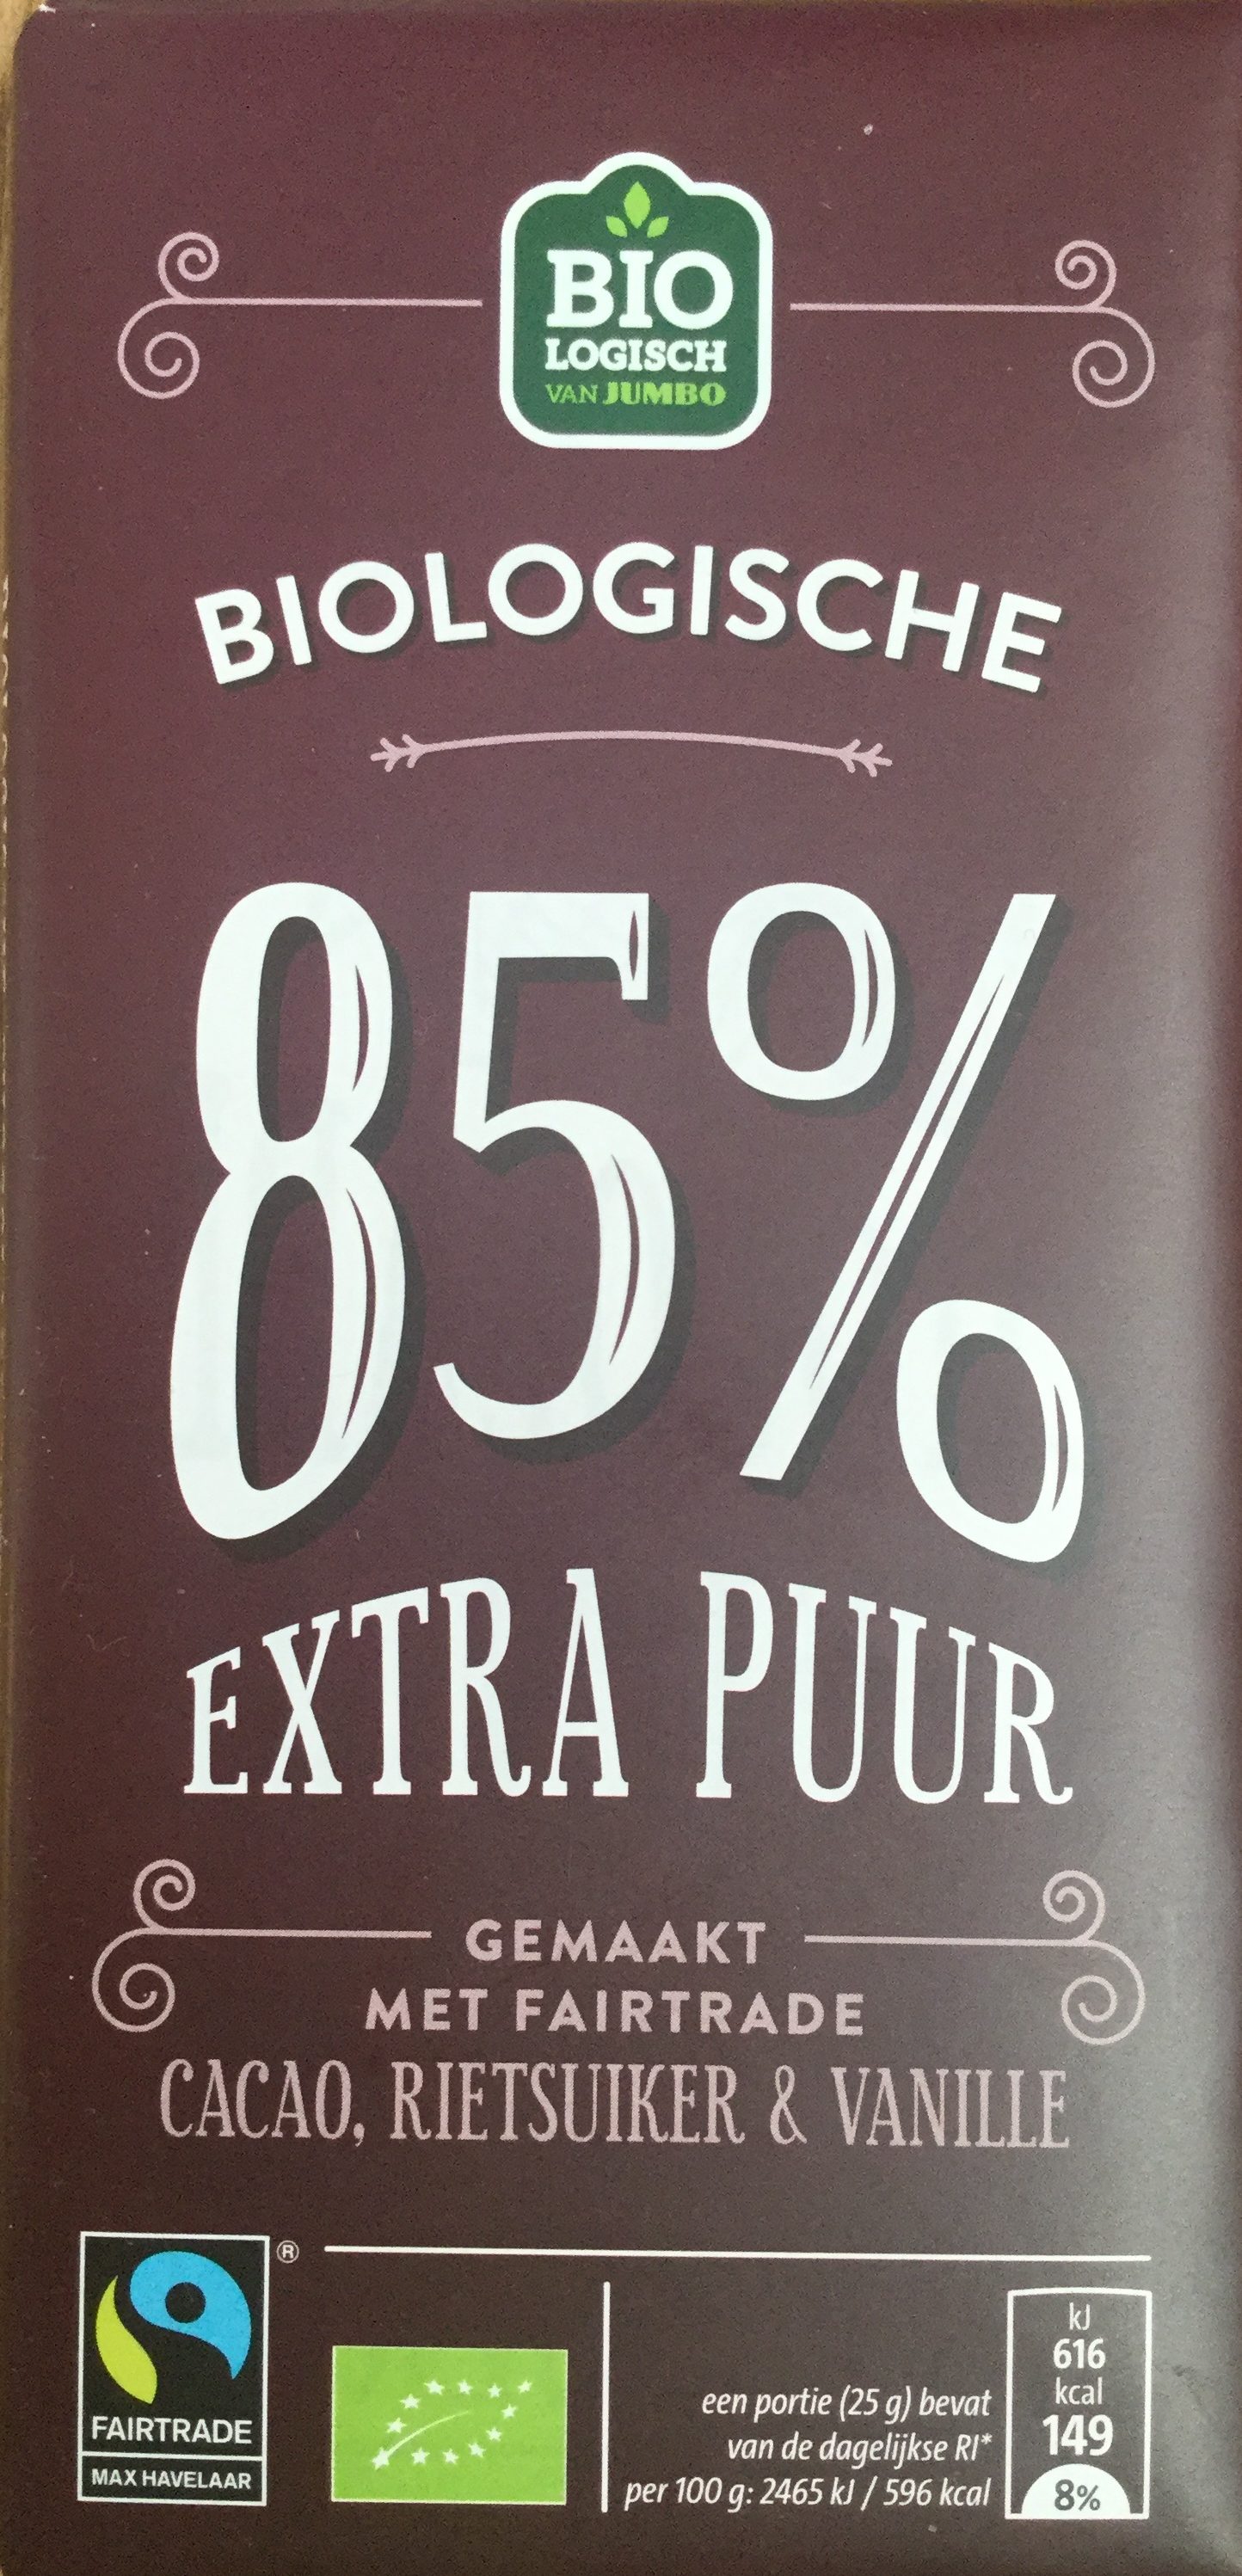 85% extra puur - Product